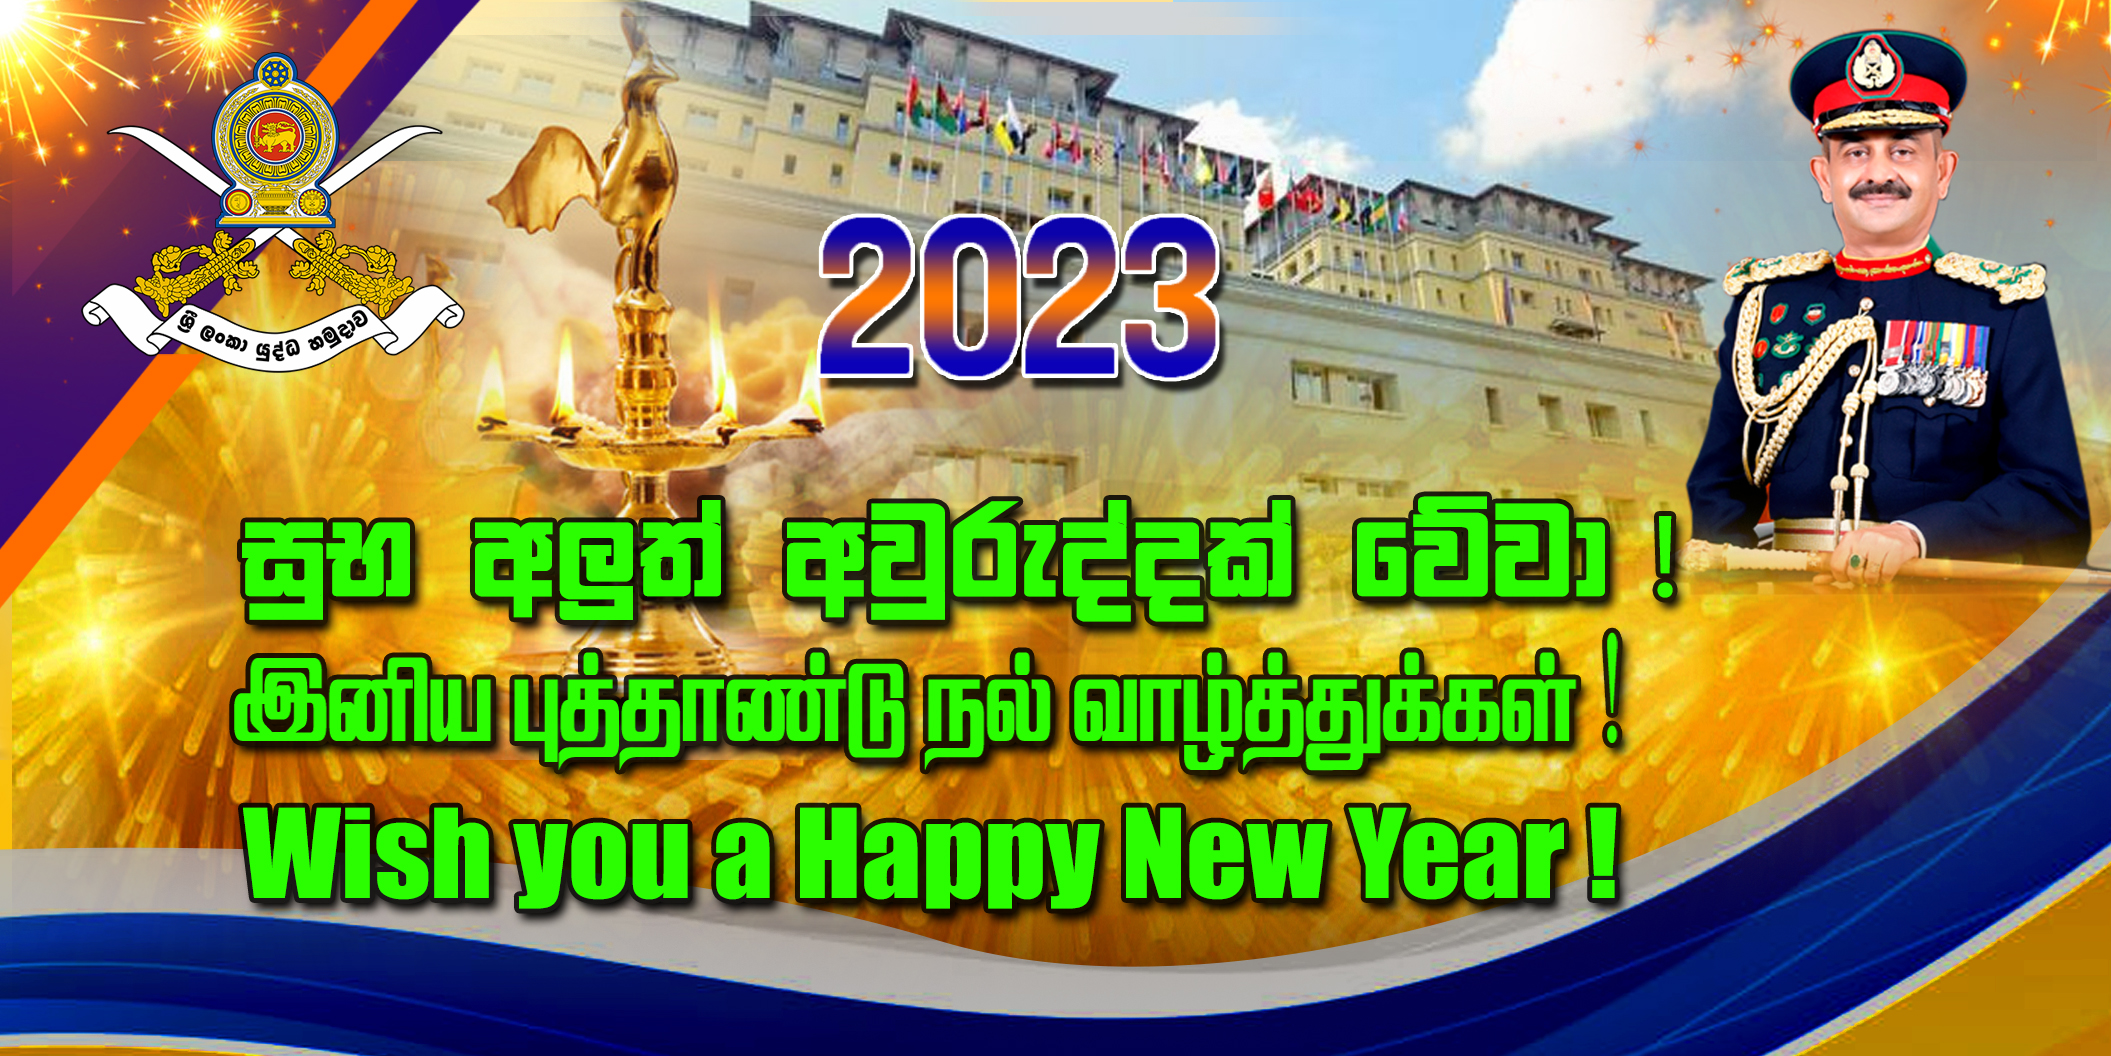 Commander Wishes Best of Luck & Prosperity to All in the New Year-2023